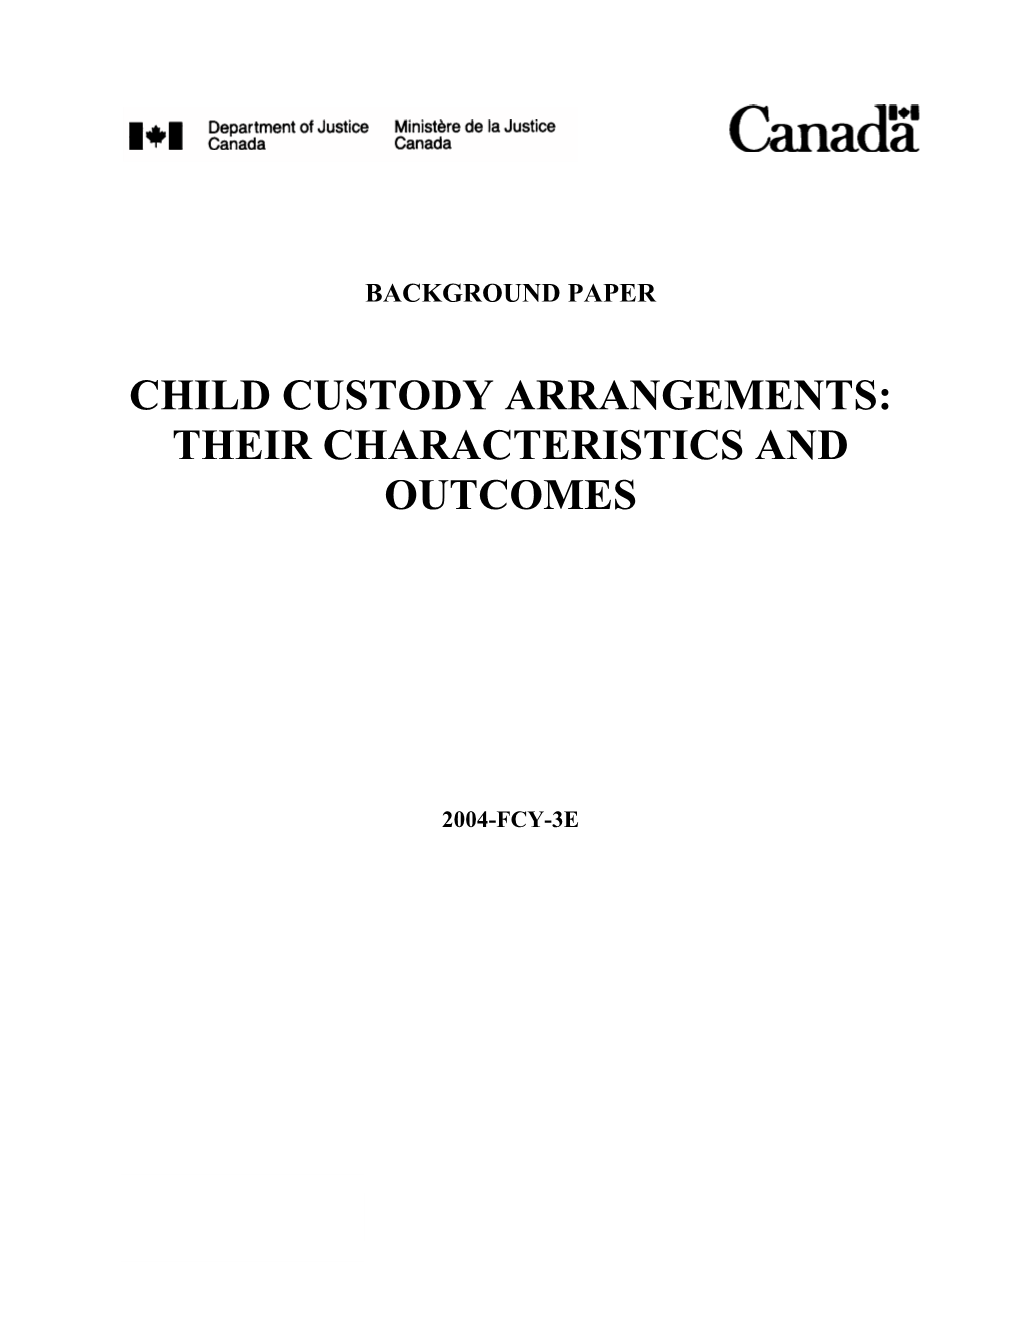 Child Custody Arrangements: Their Characteristics and Outcomes